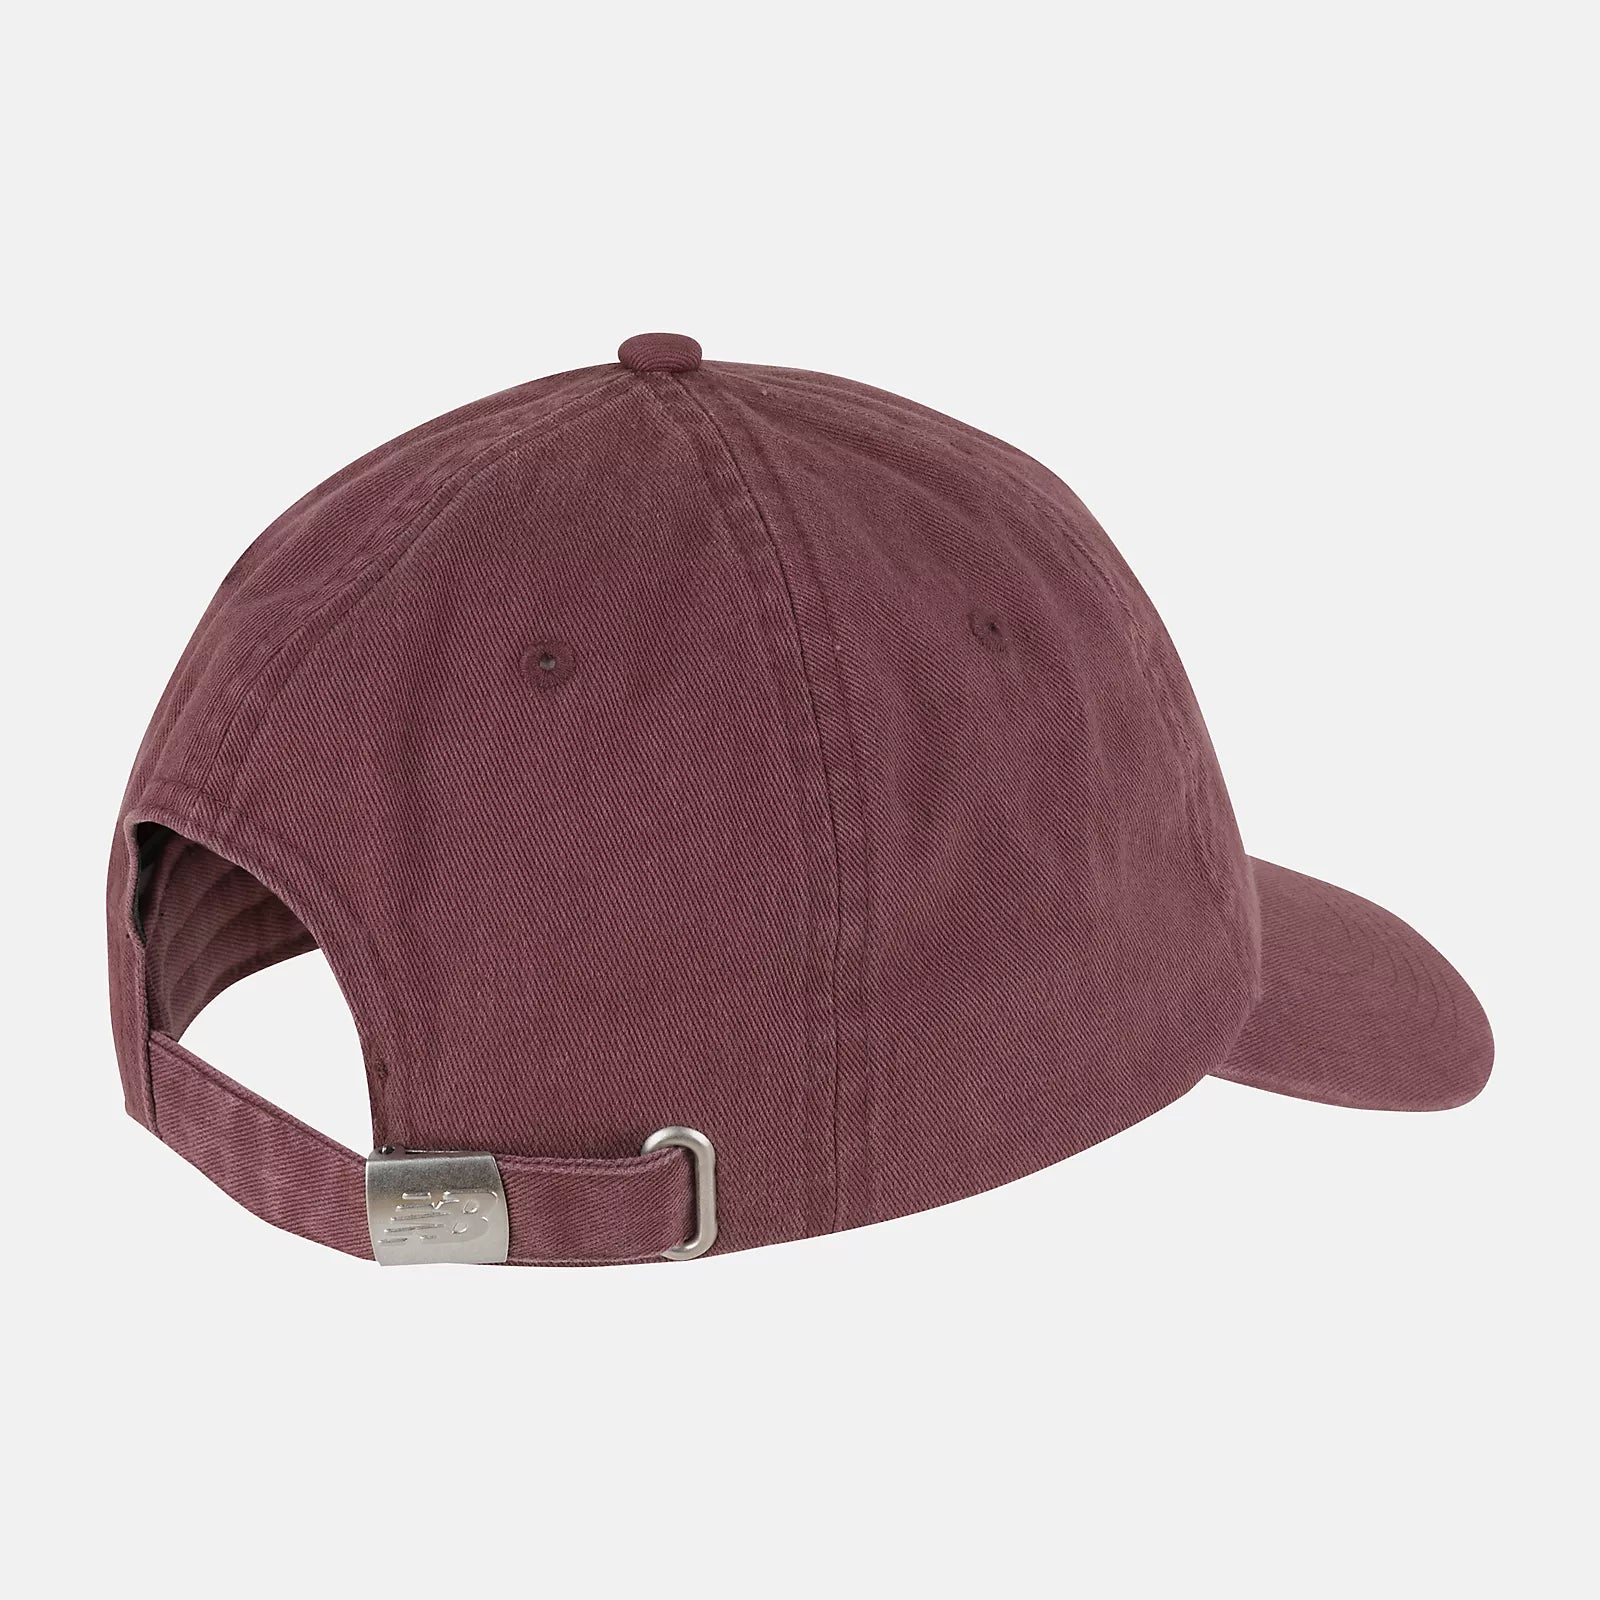 NEW BALANCE NB Logo Hat in Washed Burgundy LAH21002 O/S WASHED BURGUNDY FROM EIGHTYWINGOLD - OFFICIAL BRAND PARTNER